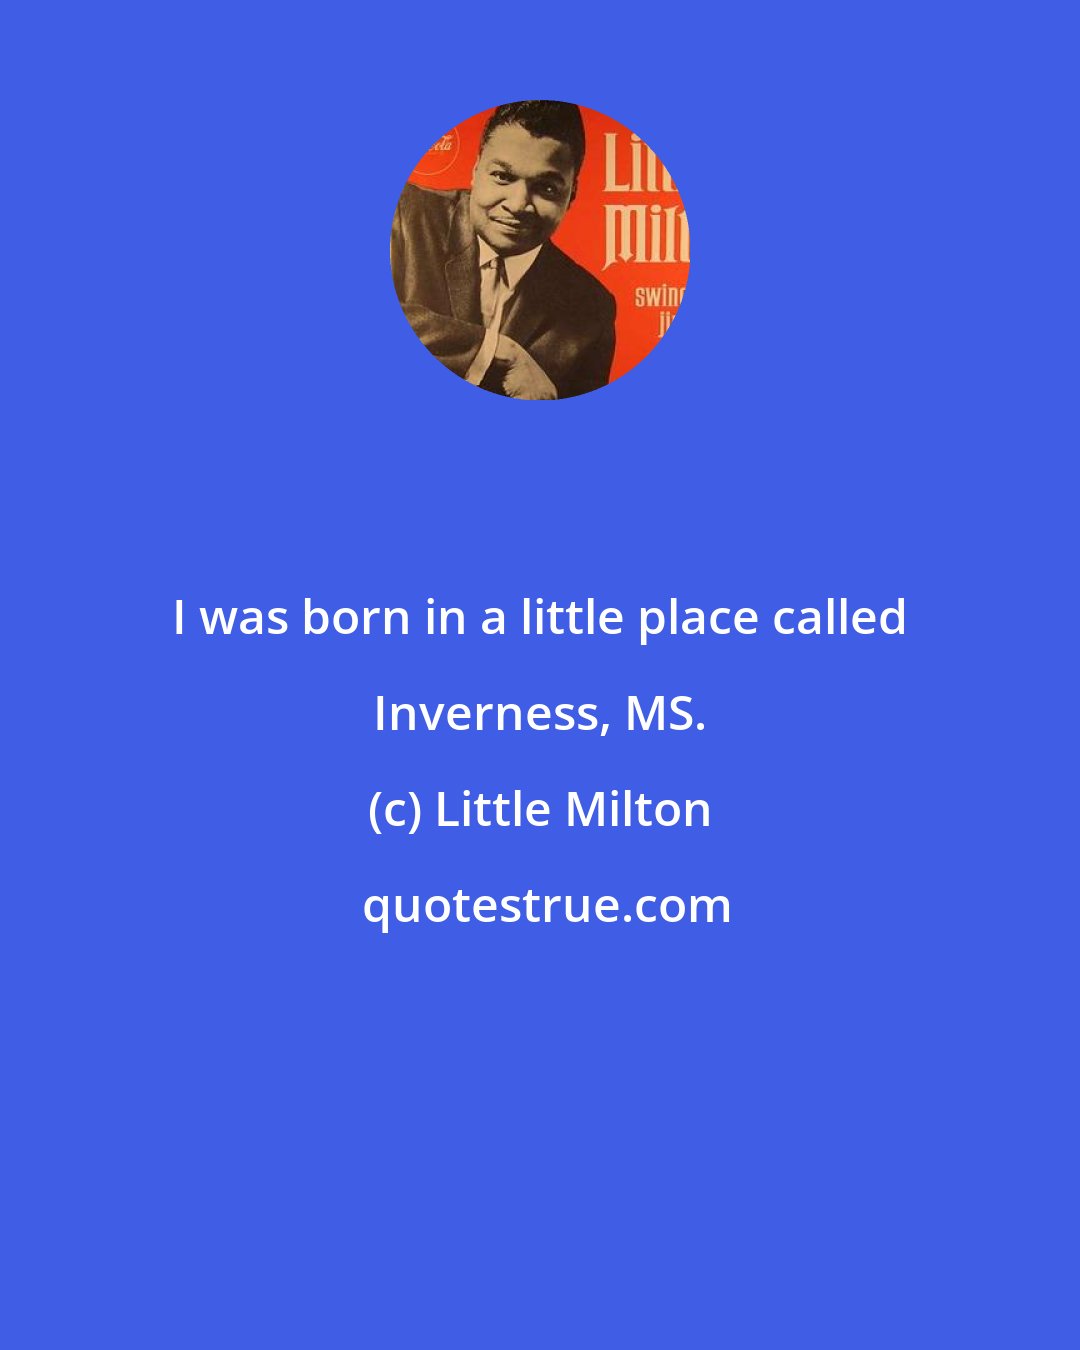 Little Milton: I was born in a little place called Inverness, MS.